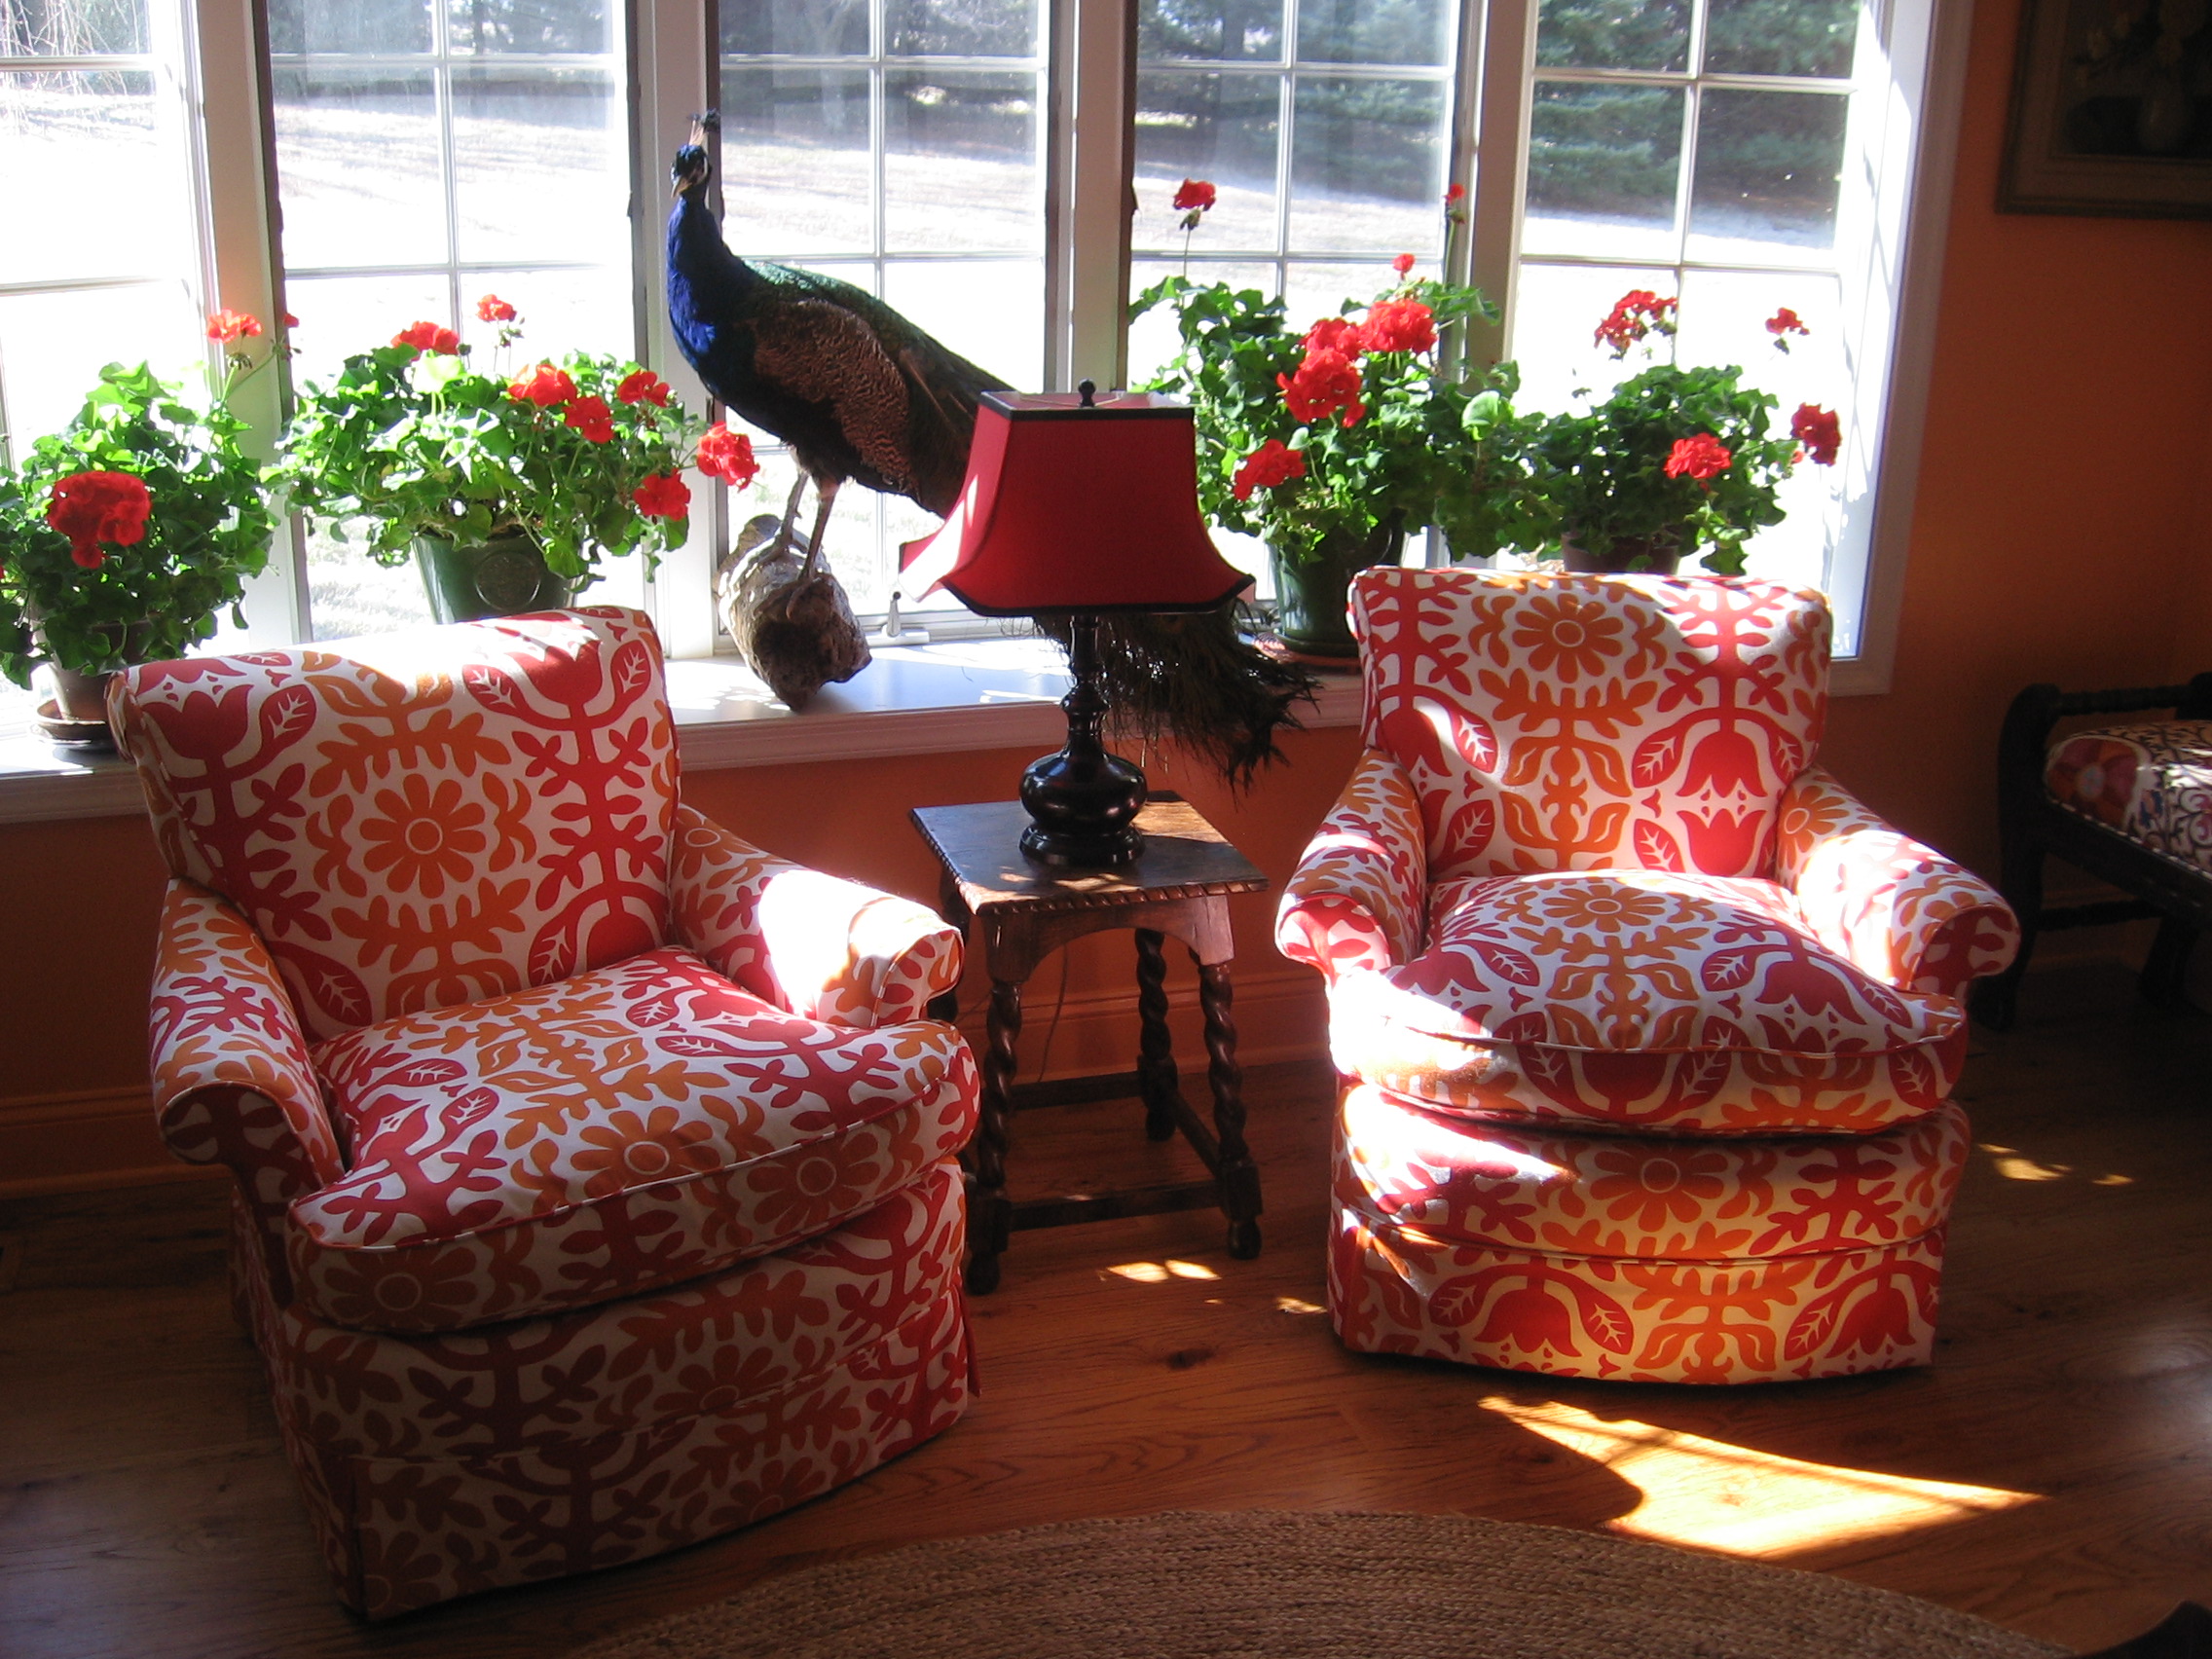 Furniture Repair Company specializing in Re-Upholstery